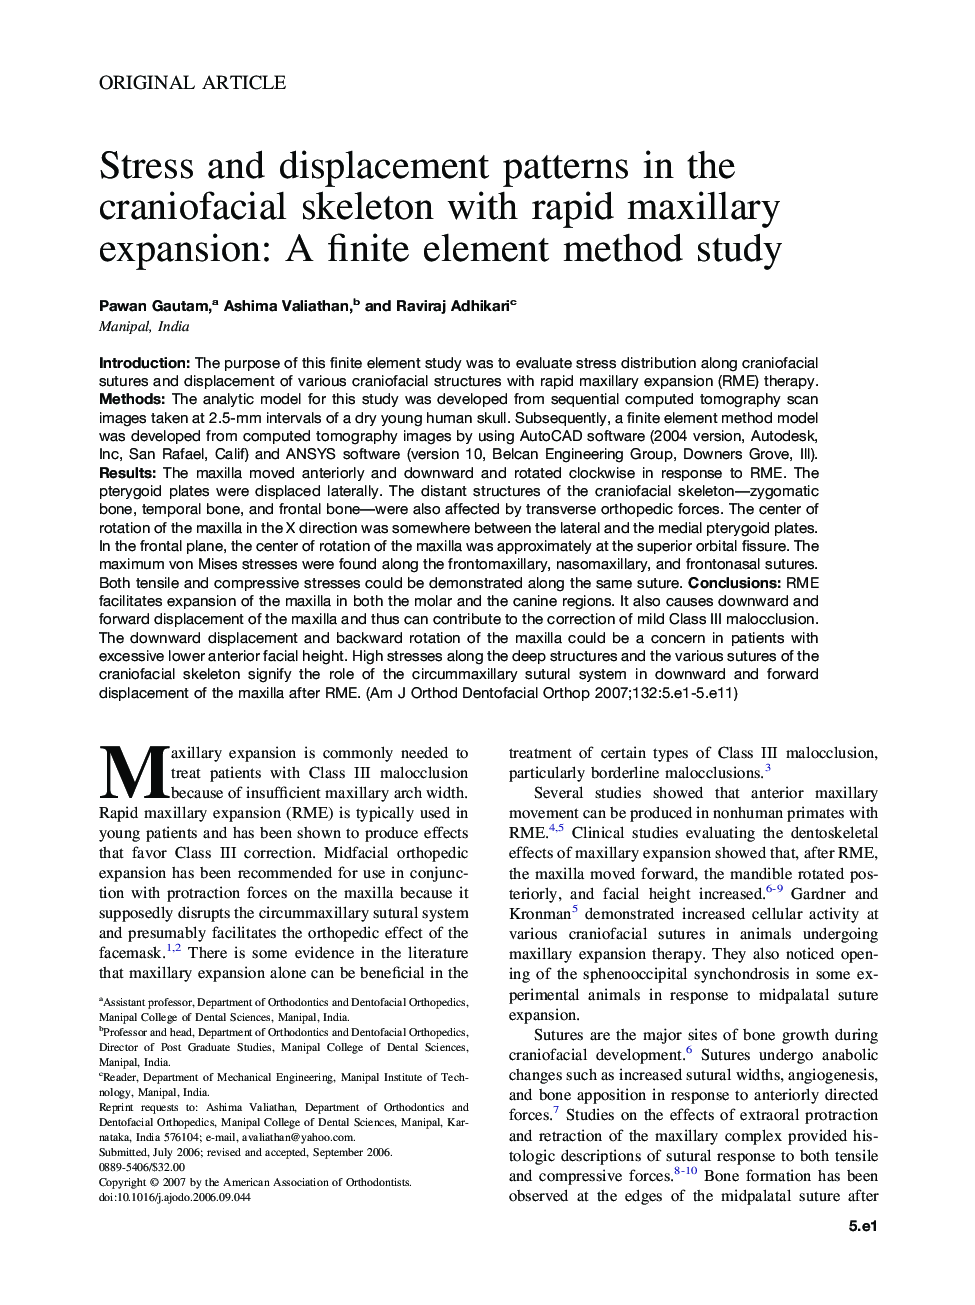 Stress and displacement patterns in the craniofacial skeleton with rapid maxillary expansion: A finite element method study